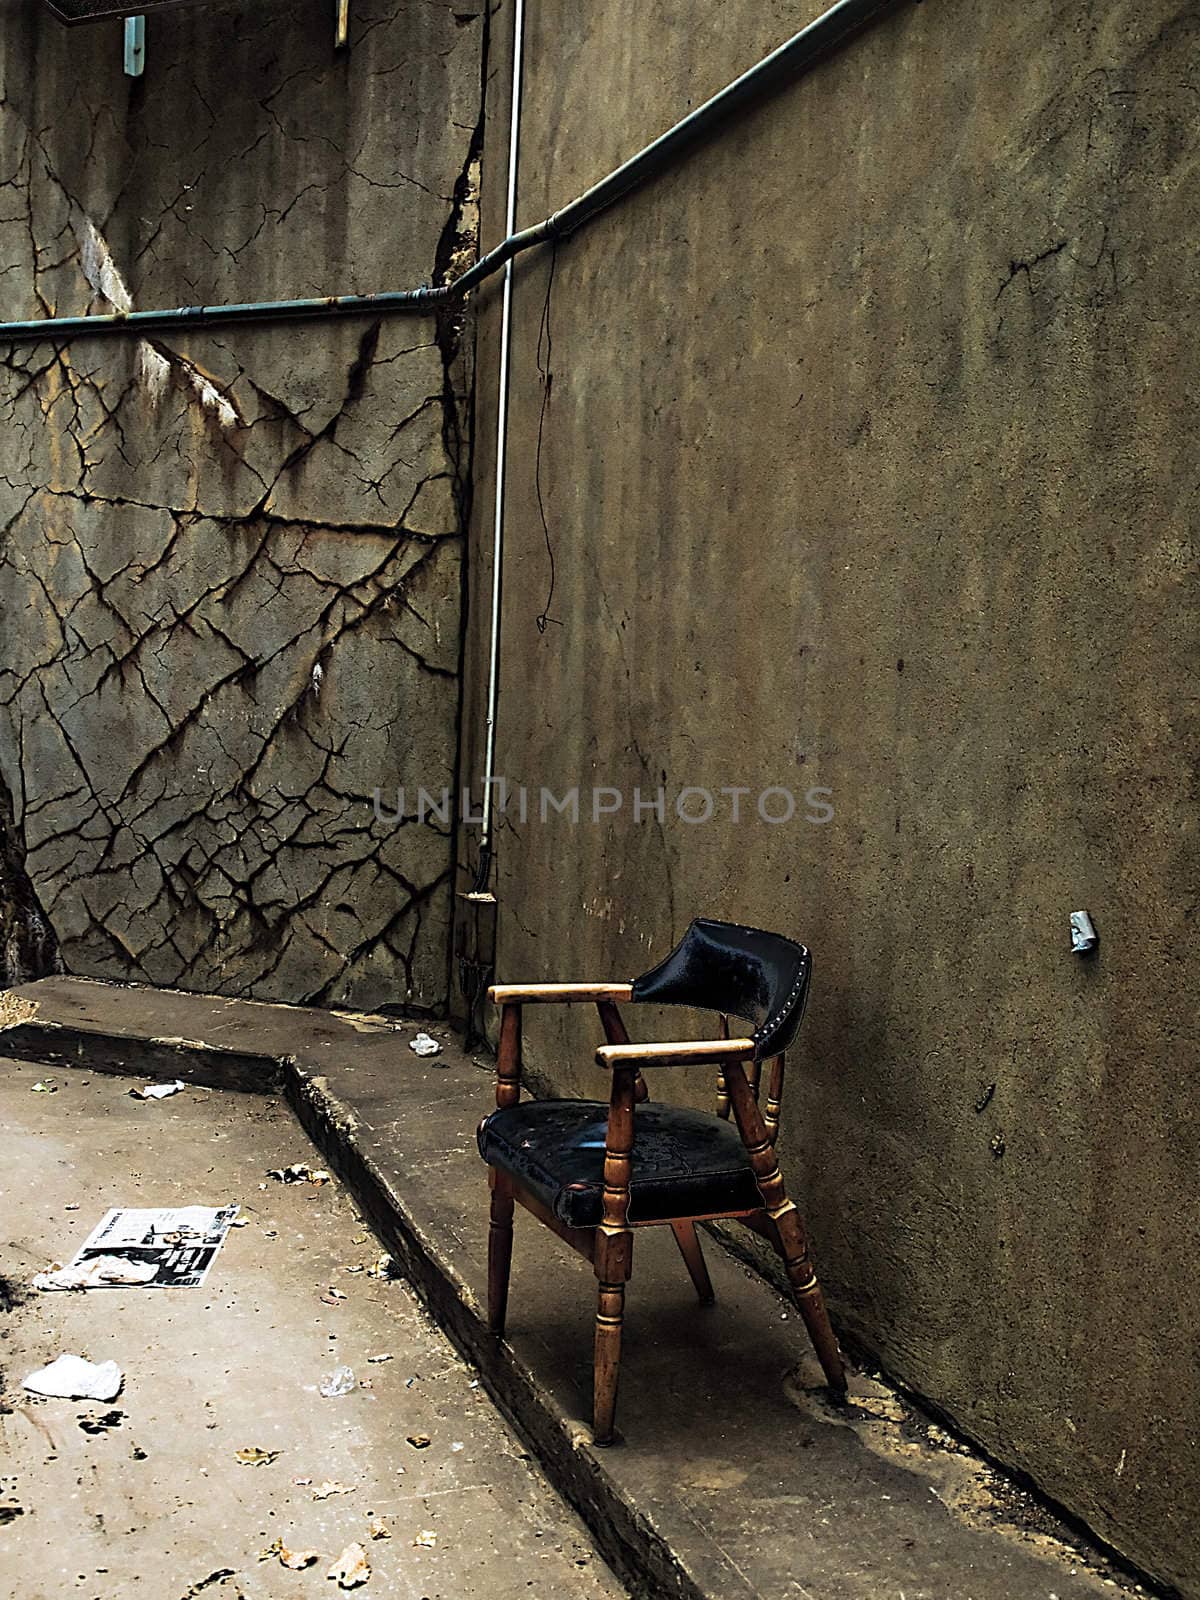 Lone chair in an abandoned building.